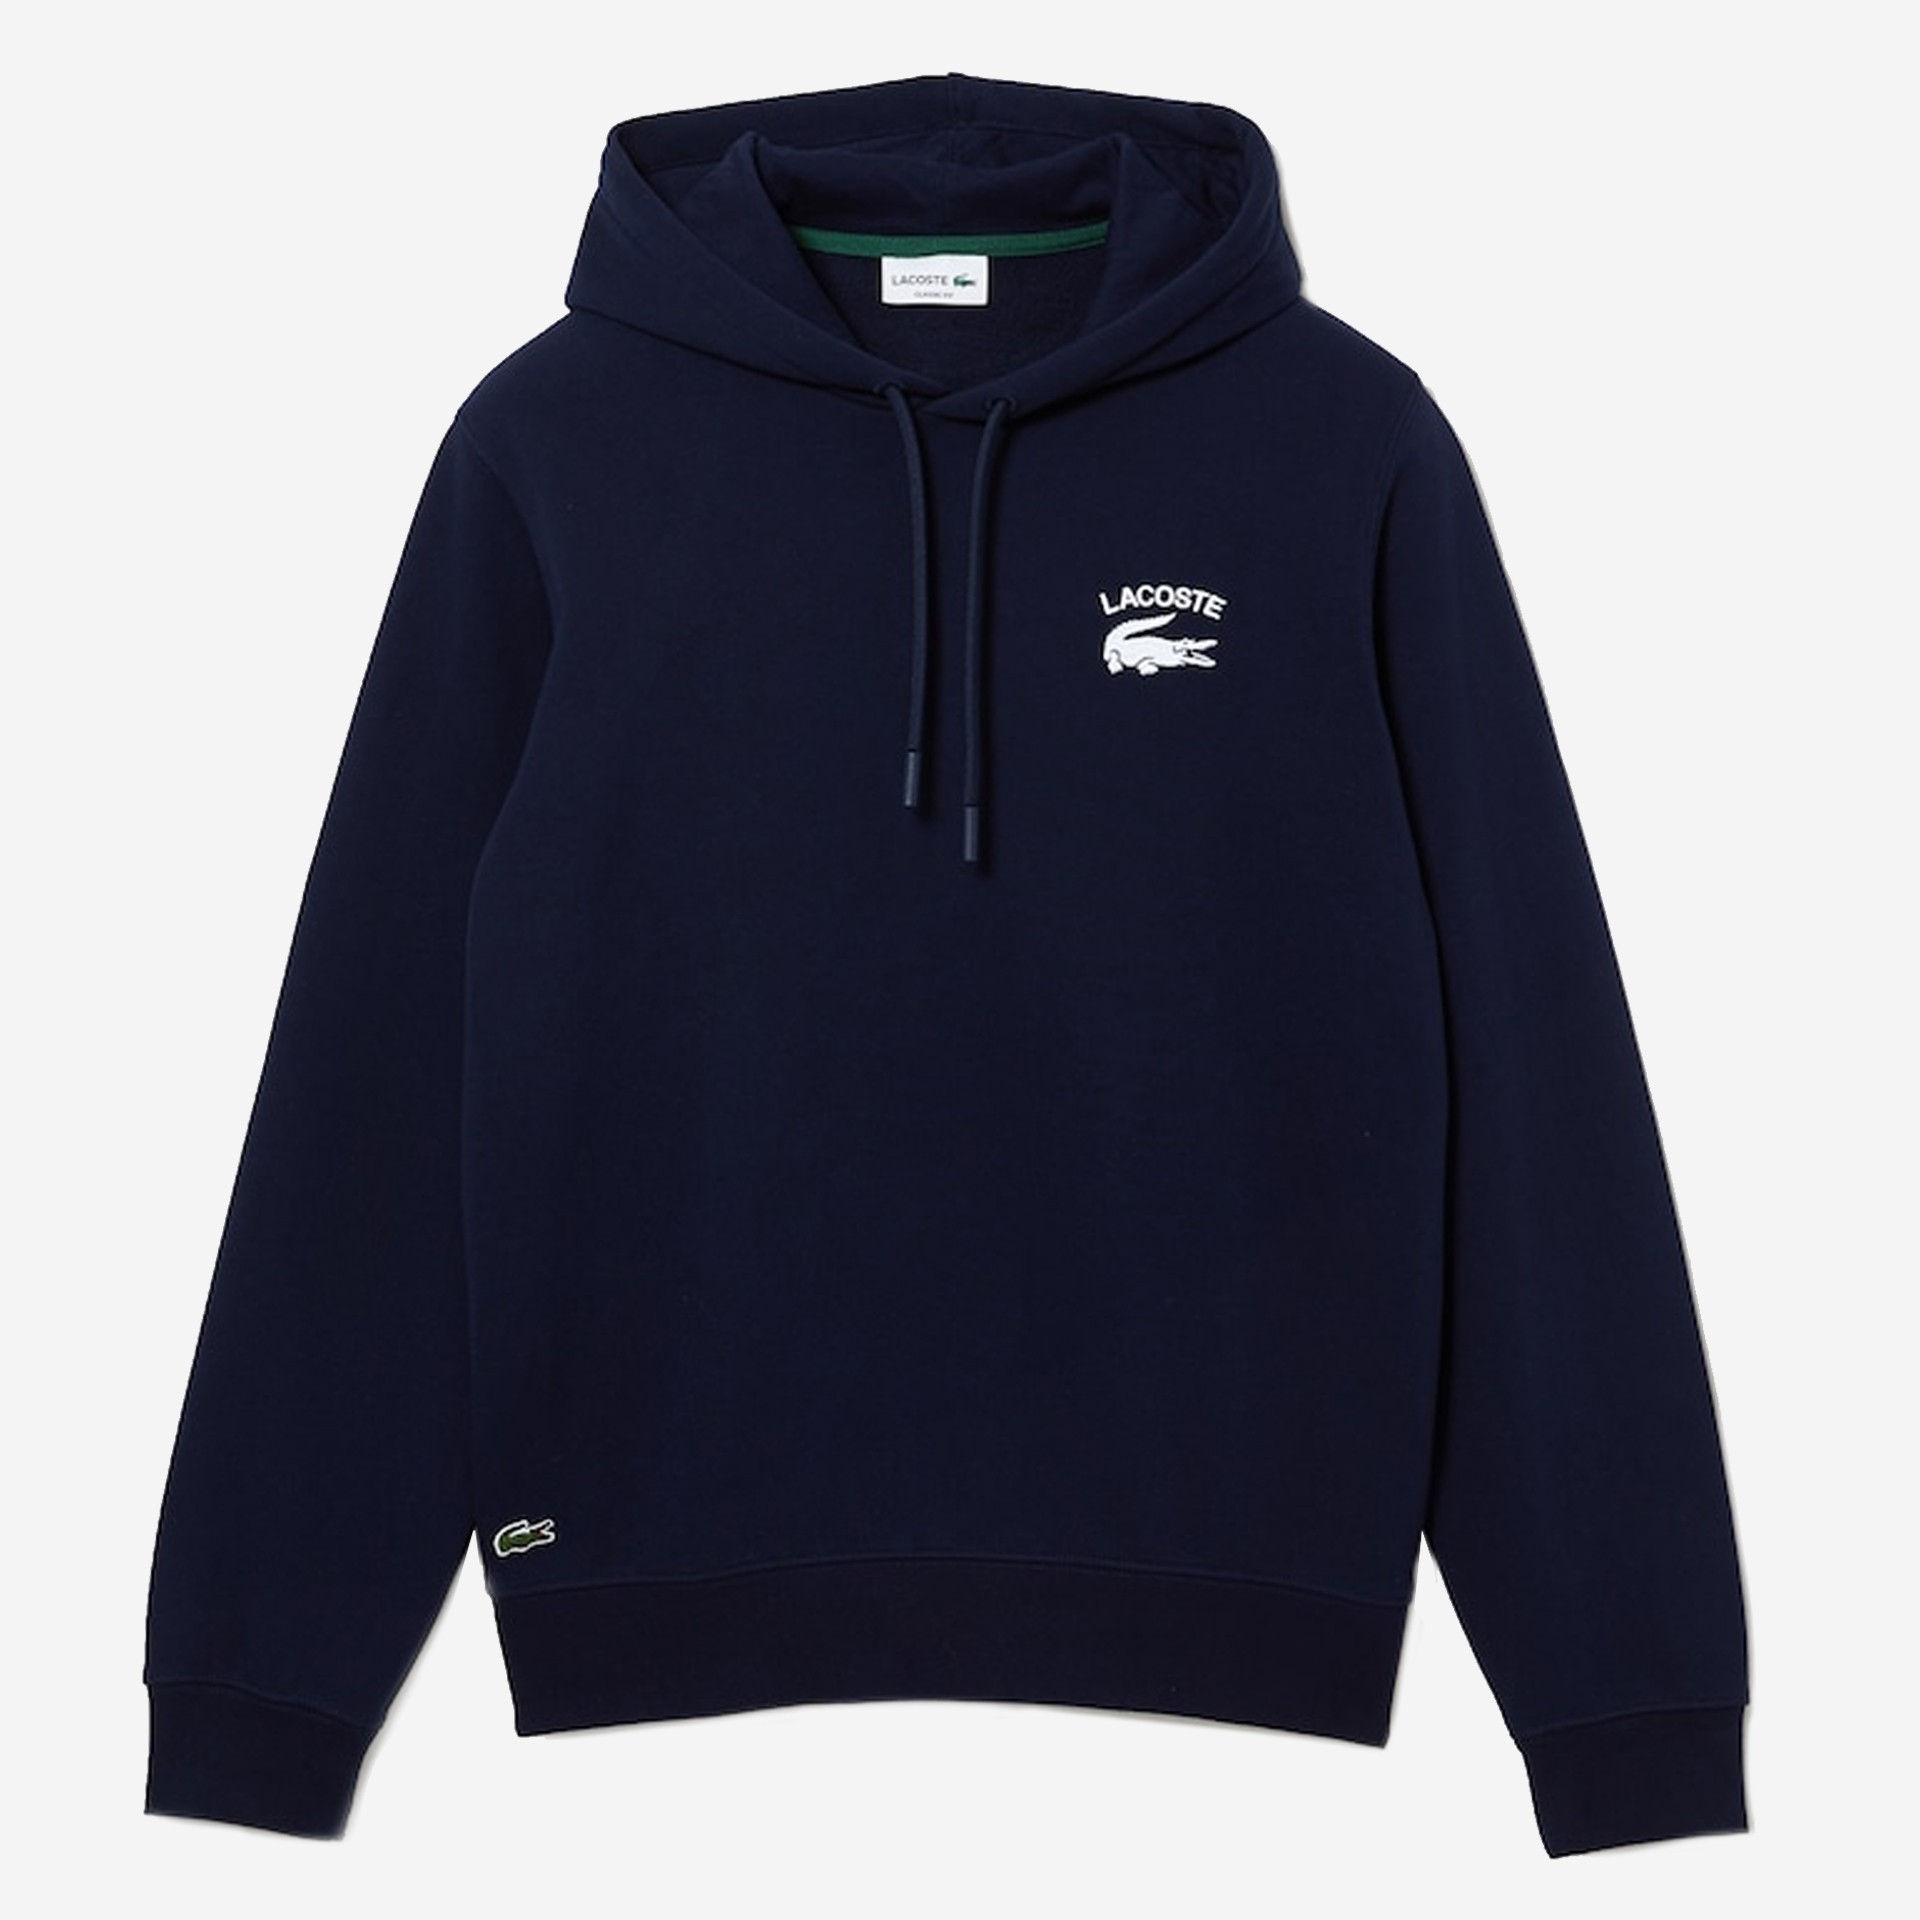 LACOSTE SWEAT HOOD CLASSIC FIT NAVY